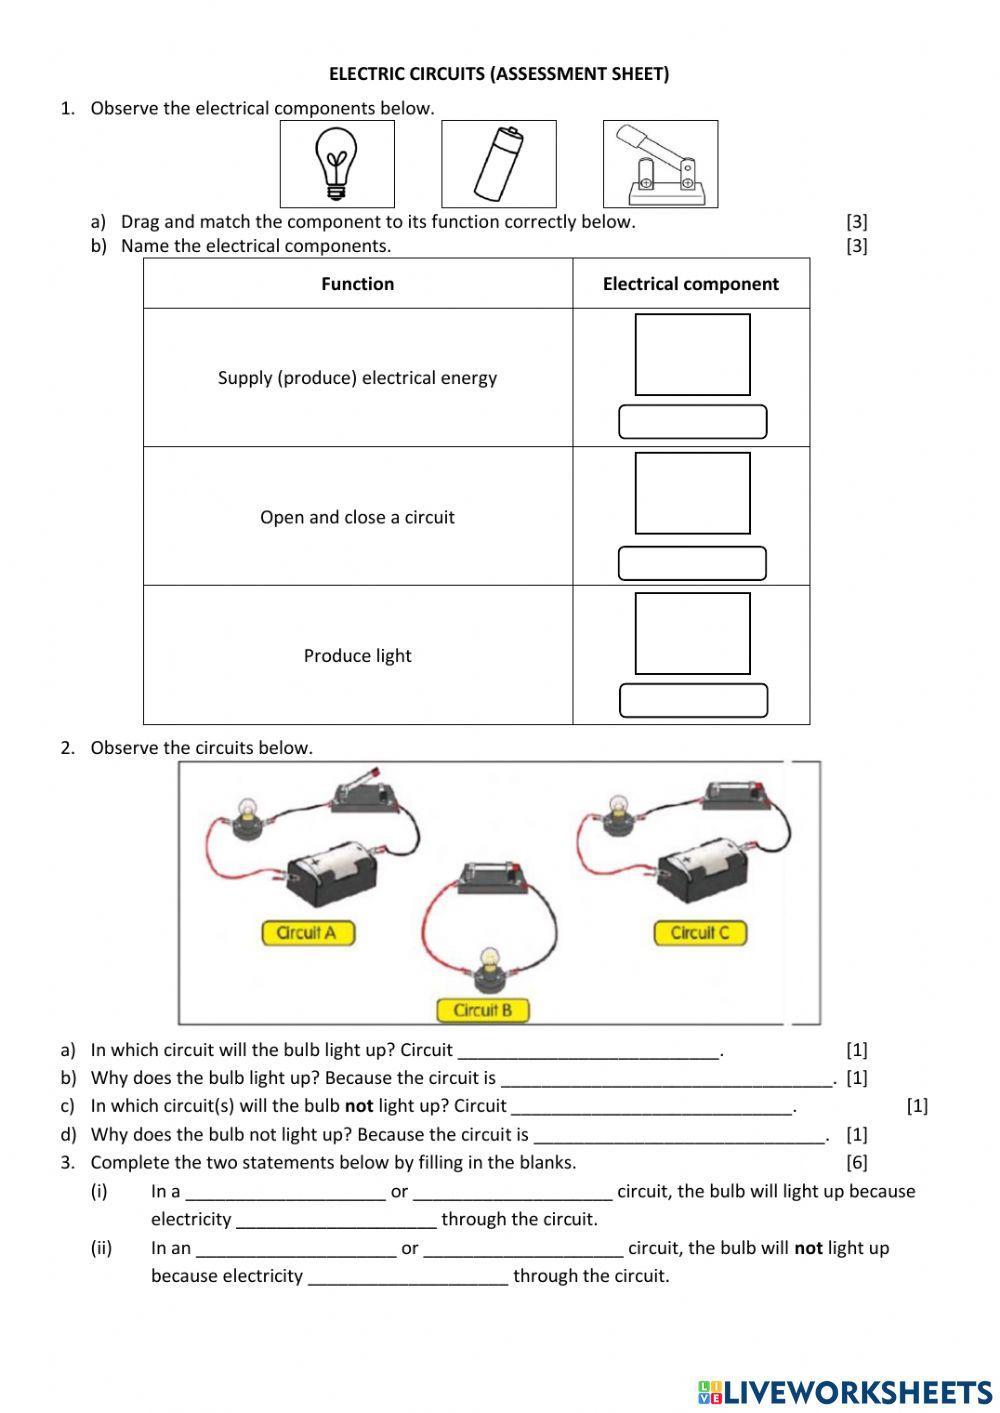 Electric Circuits Assessment Sheet